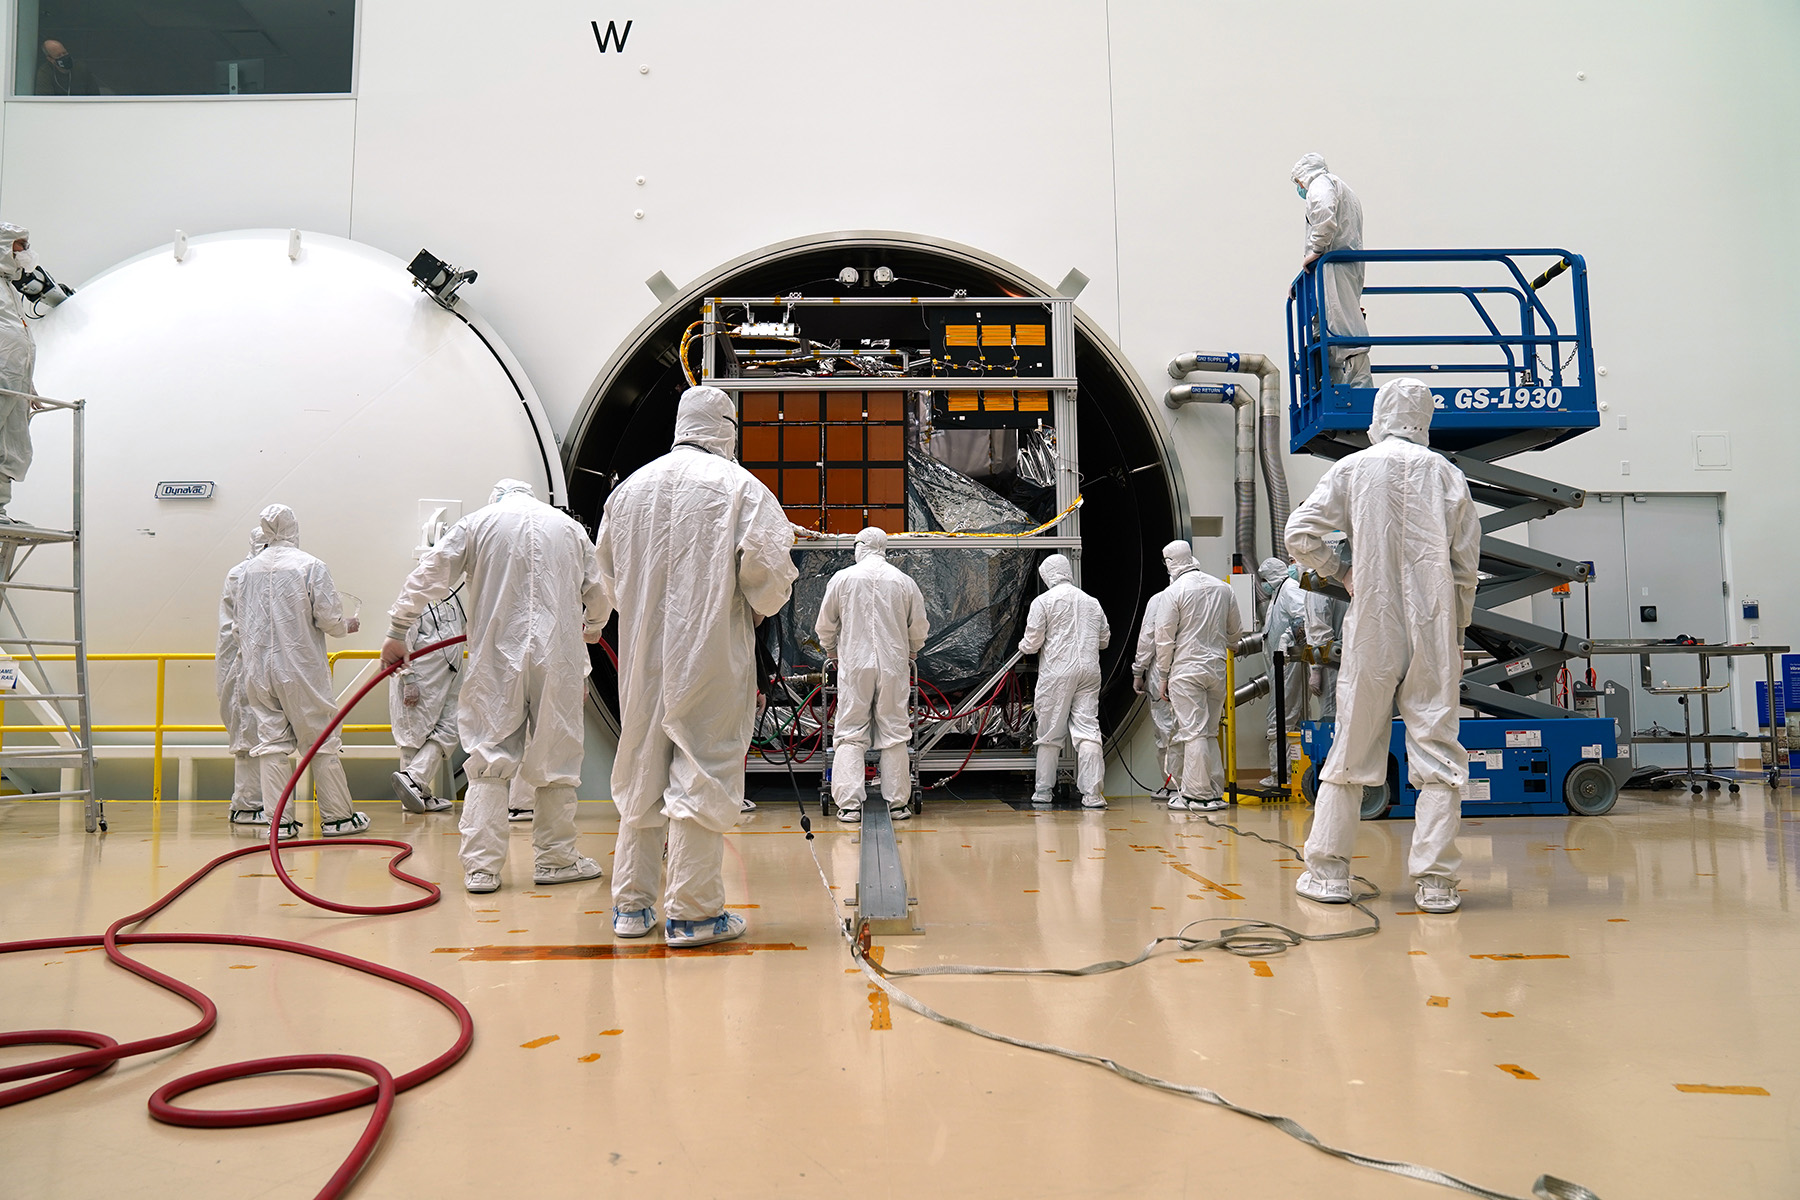 Engineers facing forward in full covering lab coats are preparing a satellite for testing